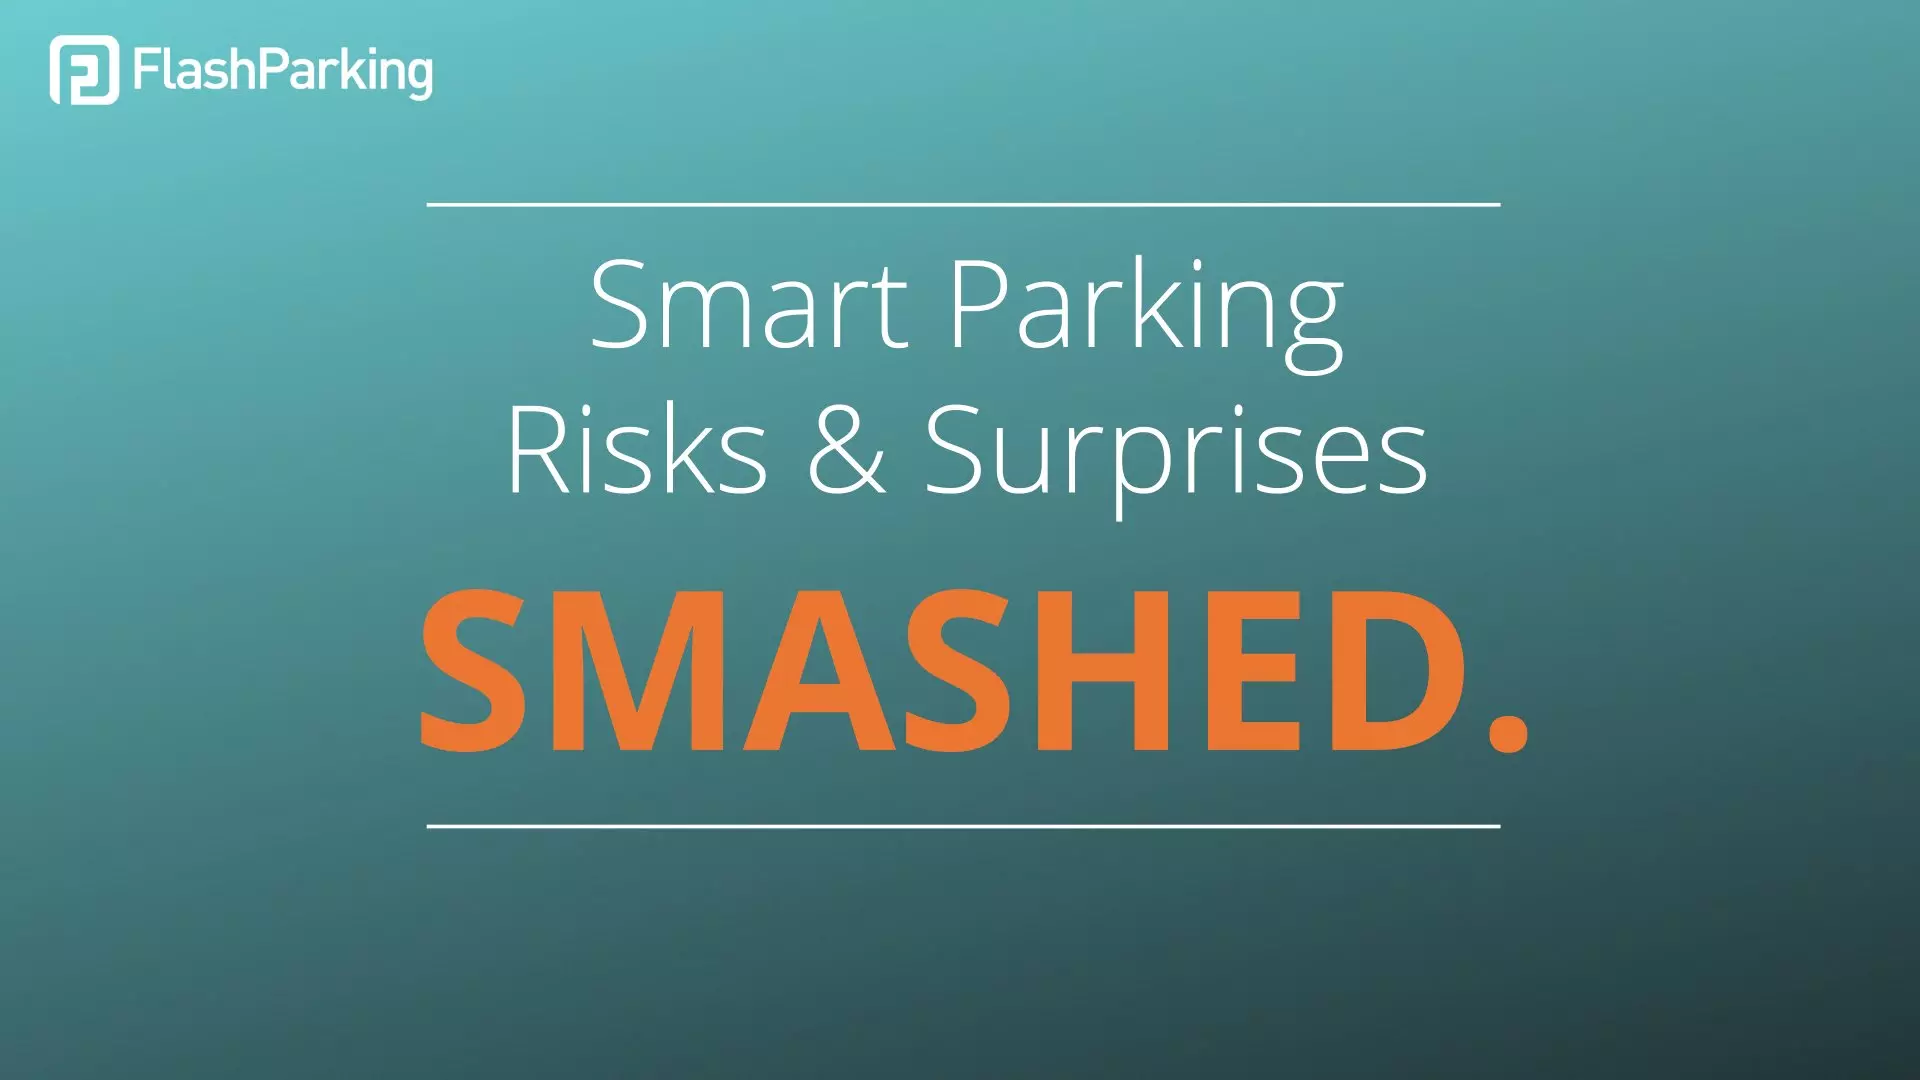 FlashParking Secures $60 Million from L Catterton's Growth Fund